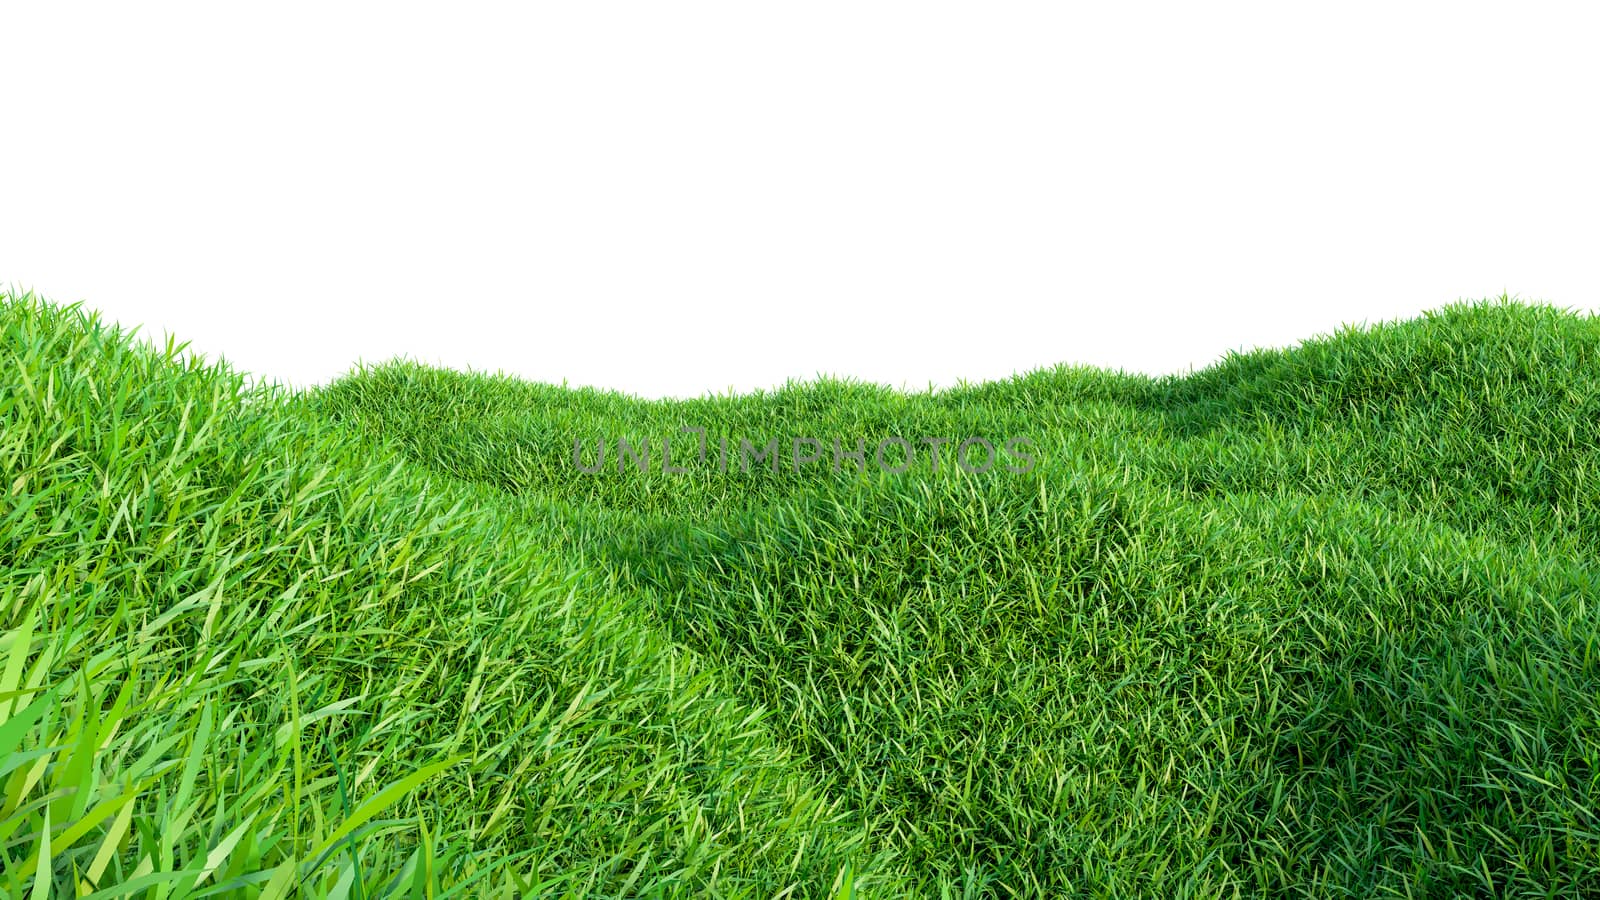 Green grass field isolated on white background. 3d illustration